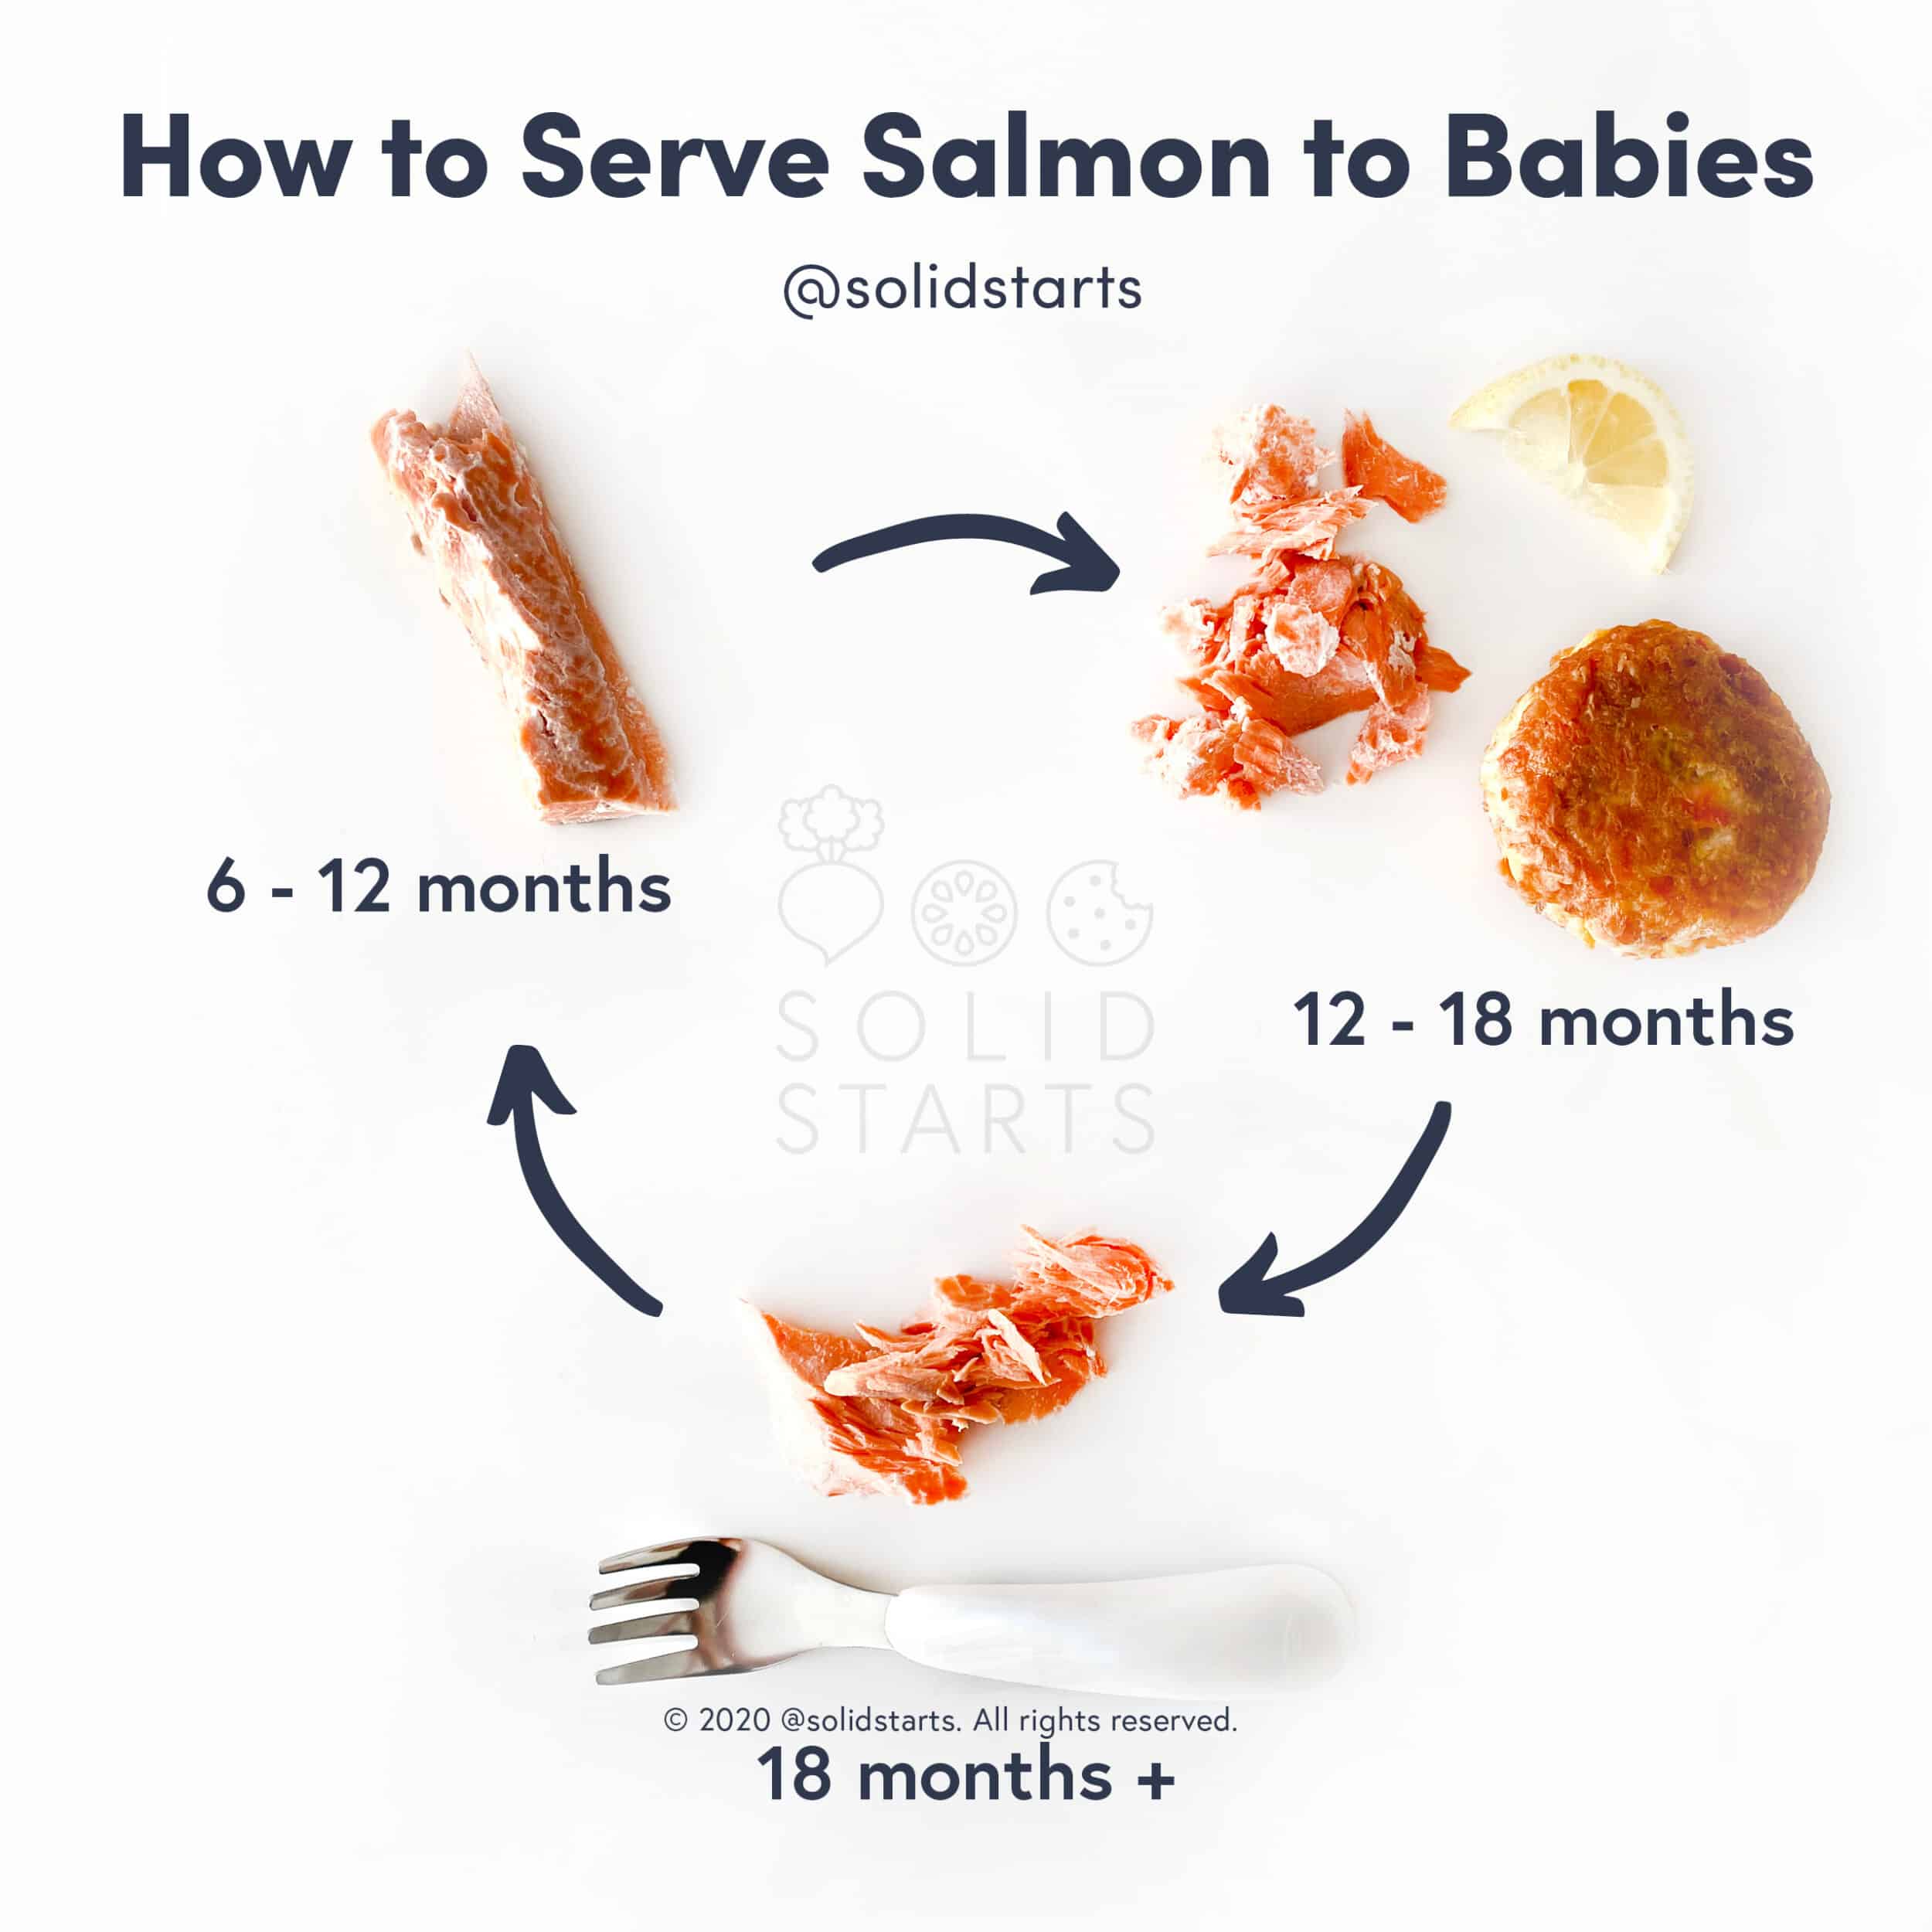 How to Serve Salmon to Babies by Age